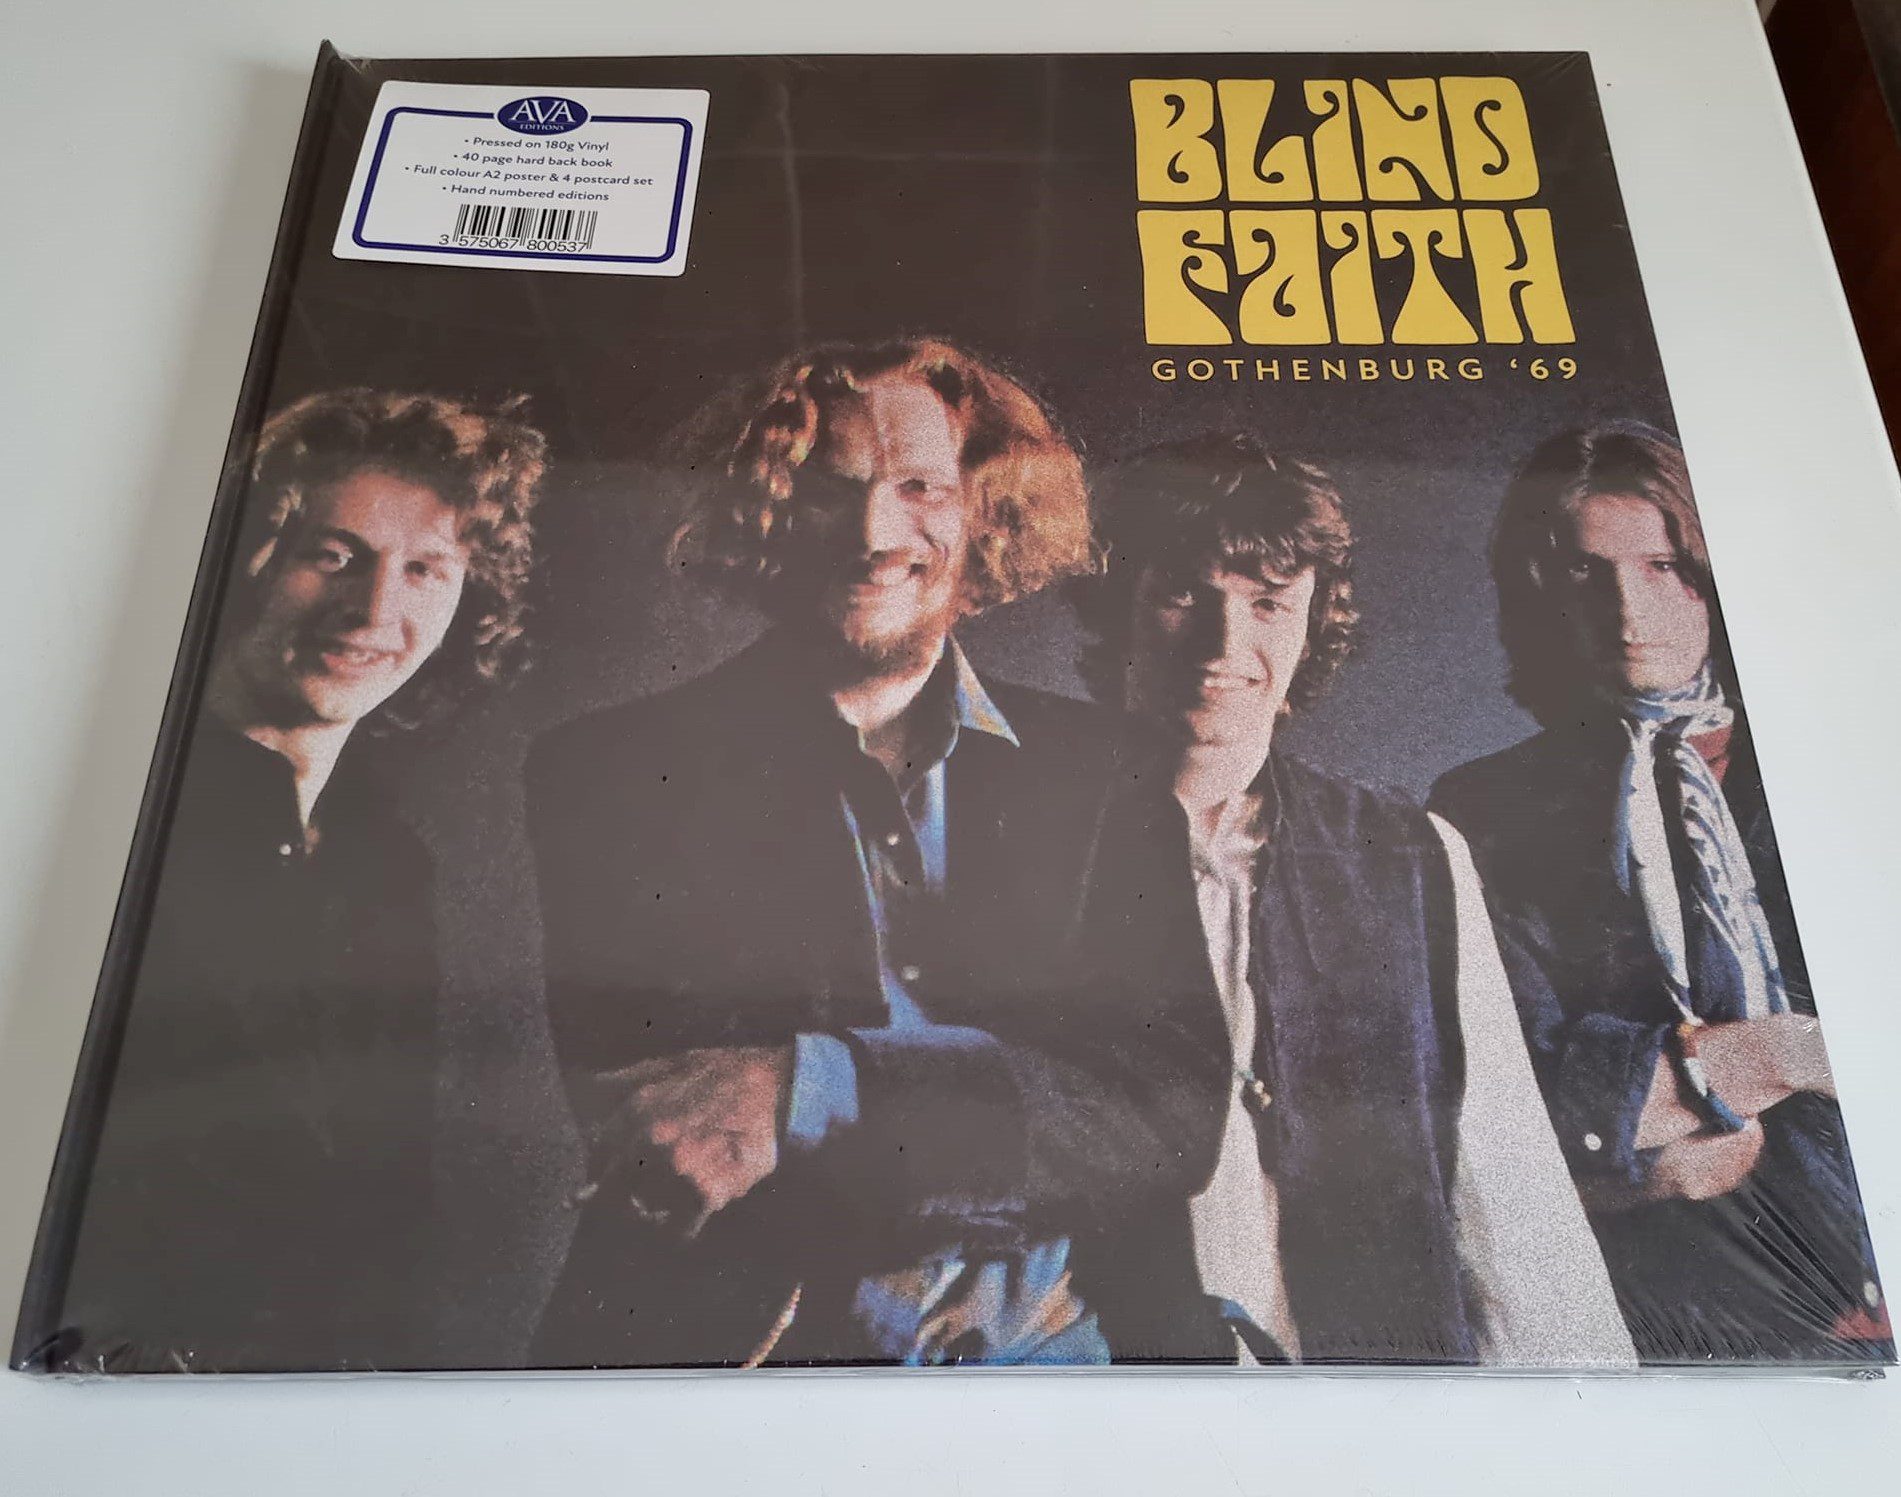 Buy this rare Blind Faith record boxset by clicking here